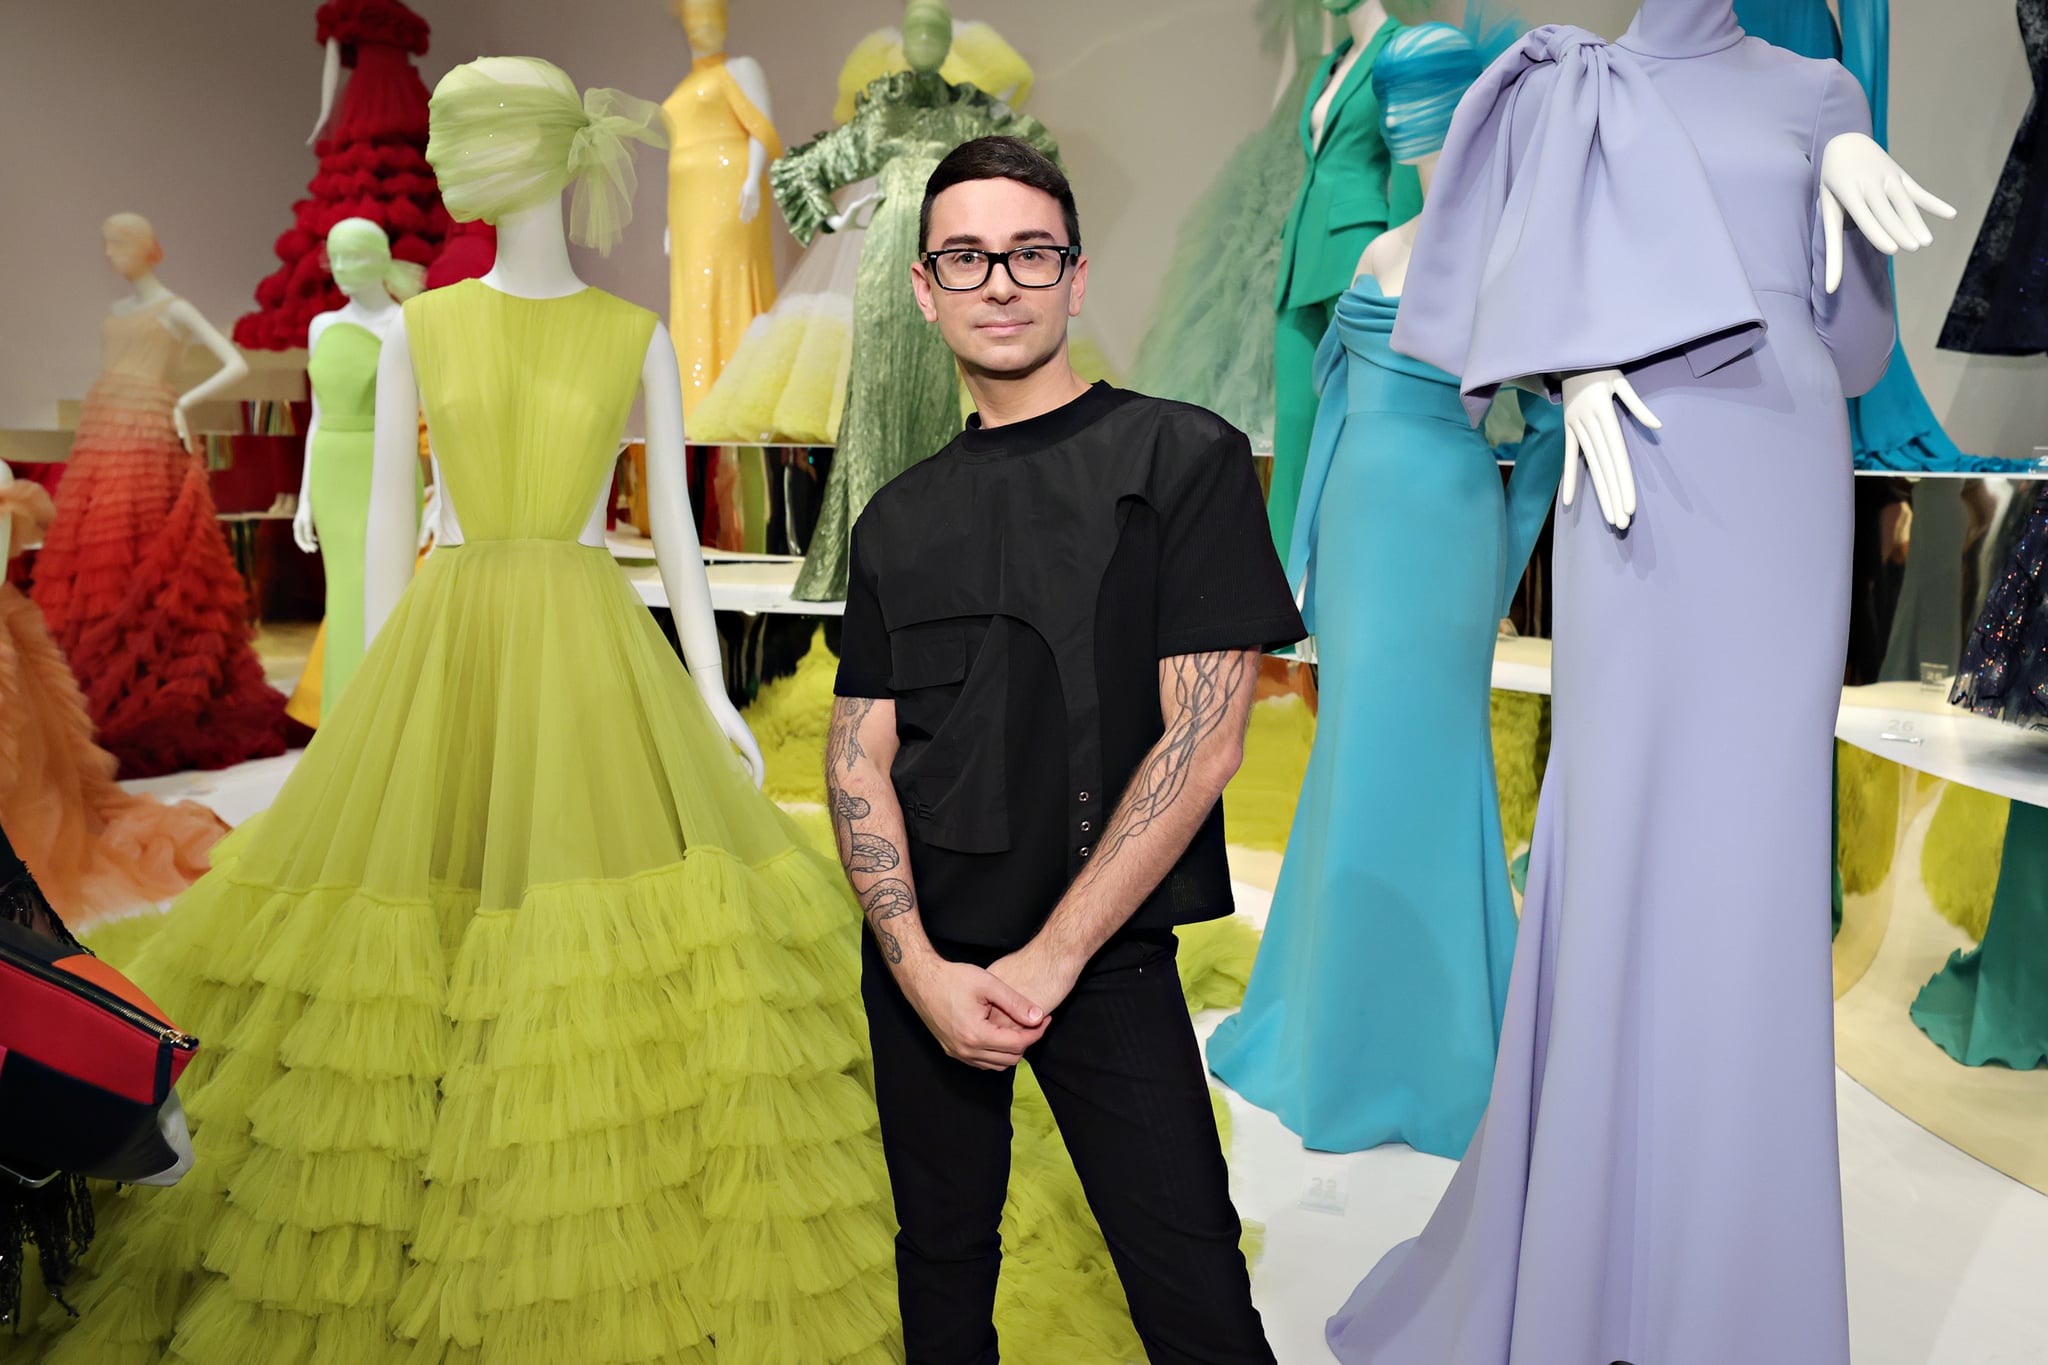 SAVANNAH, GEORGIA - OCTOBER 22: Christian Siriano attends the opening reception for Christian Siriano 